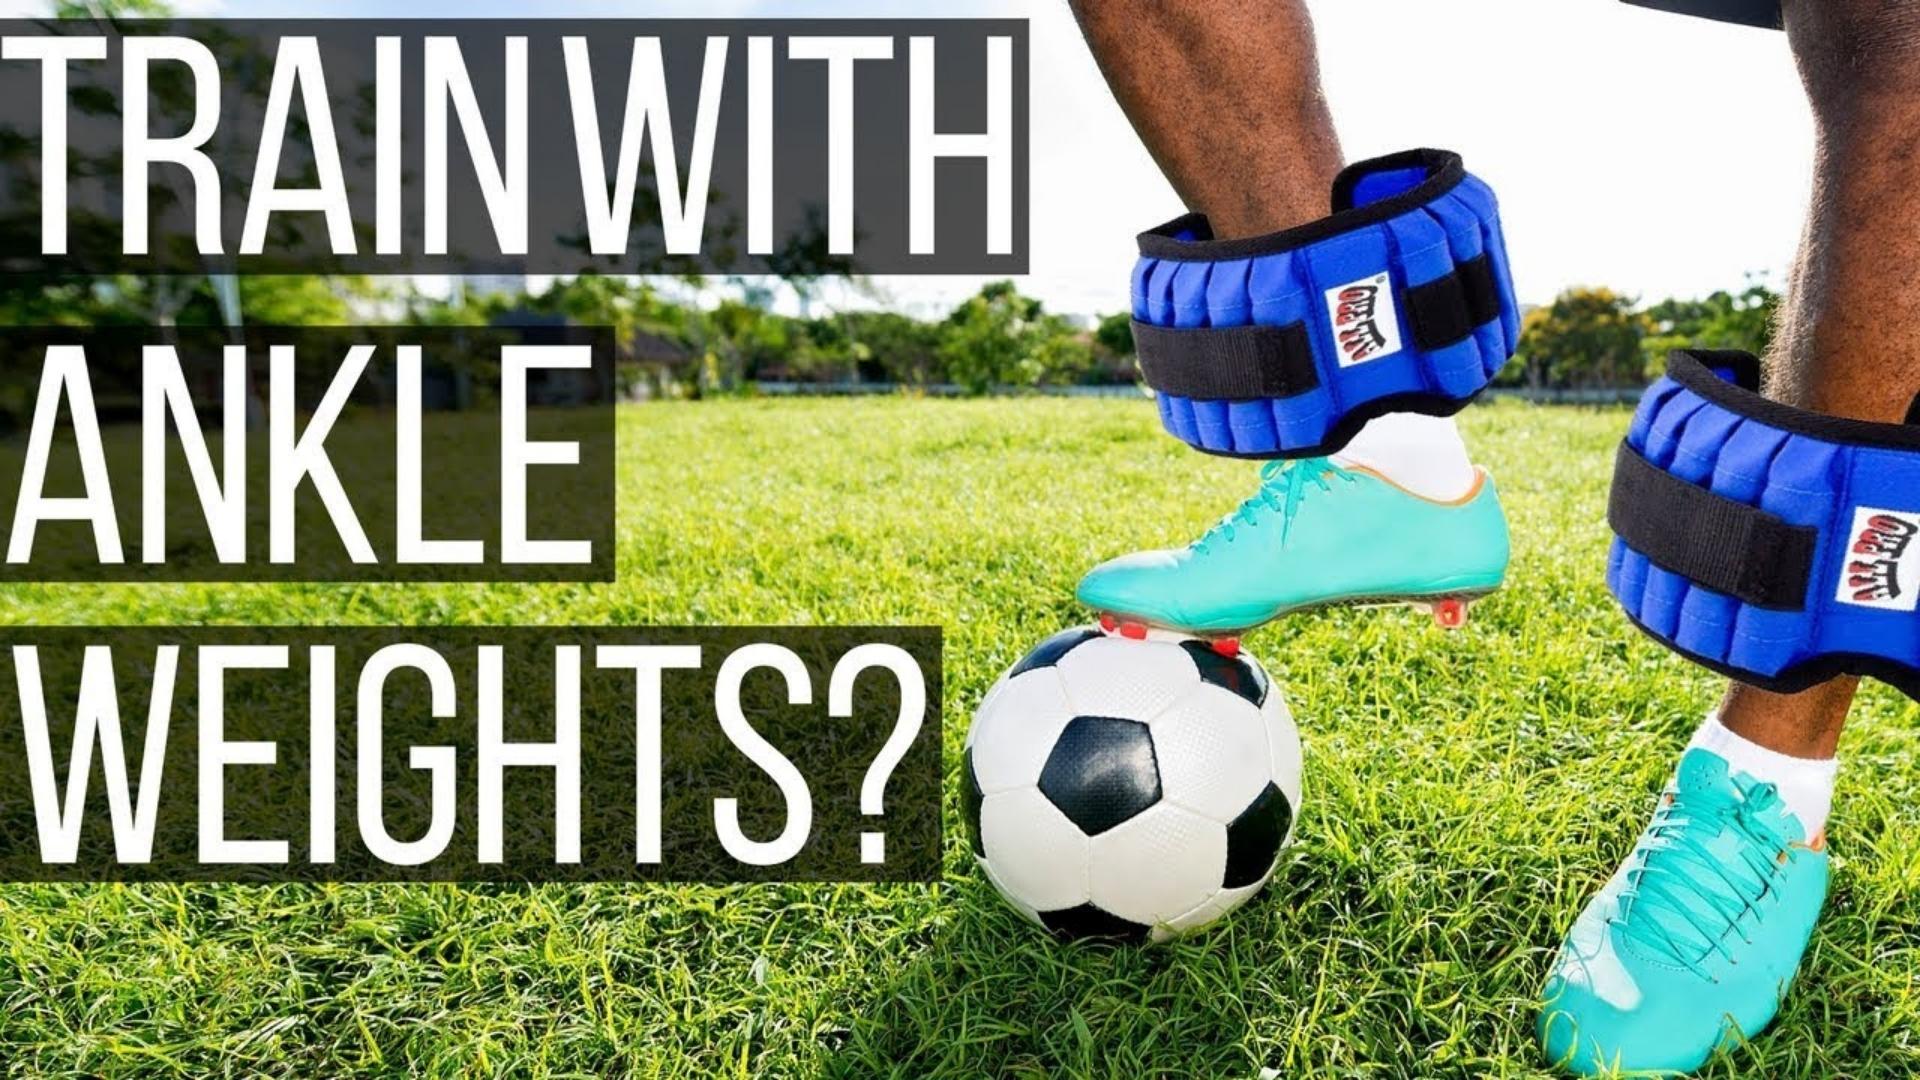 Use Ankle Weights to Maximize Your Workout